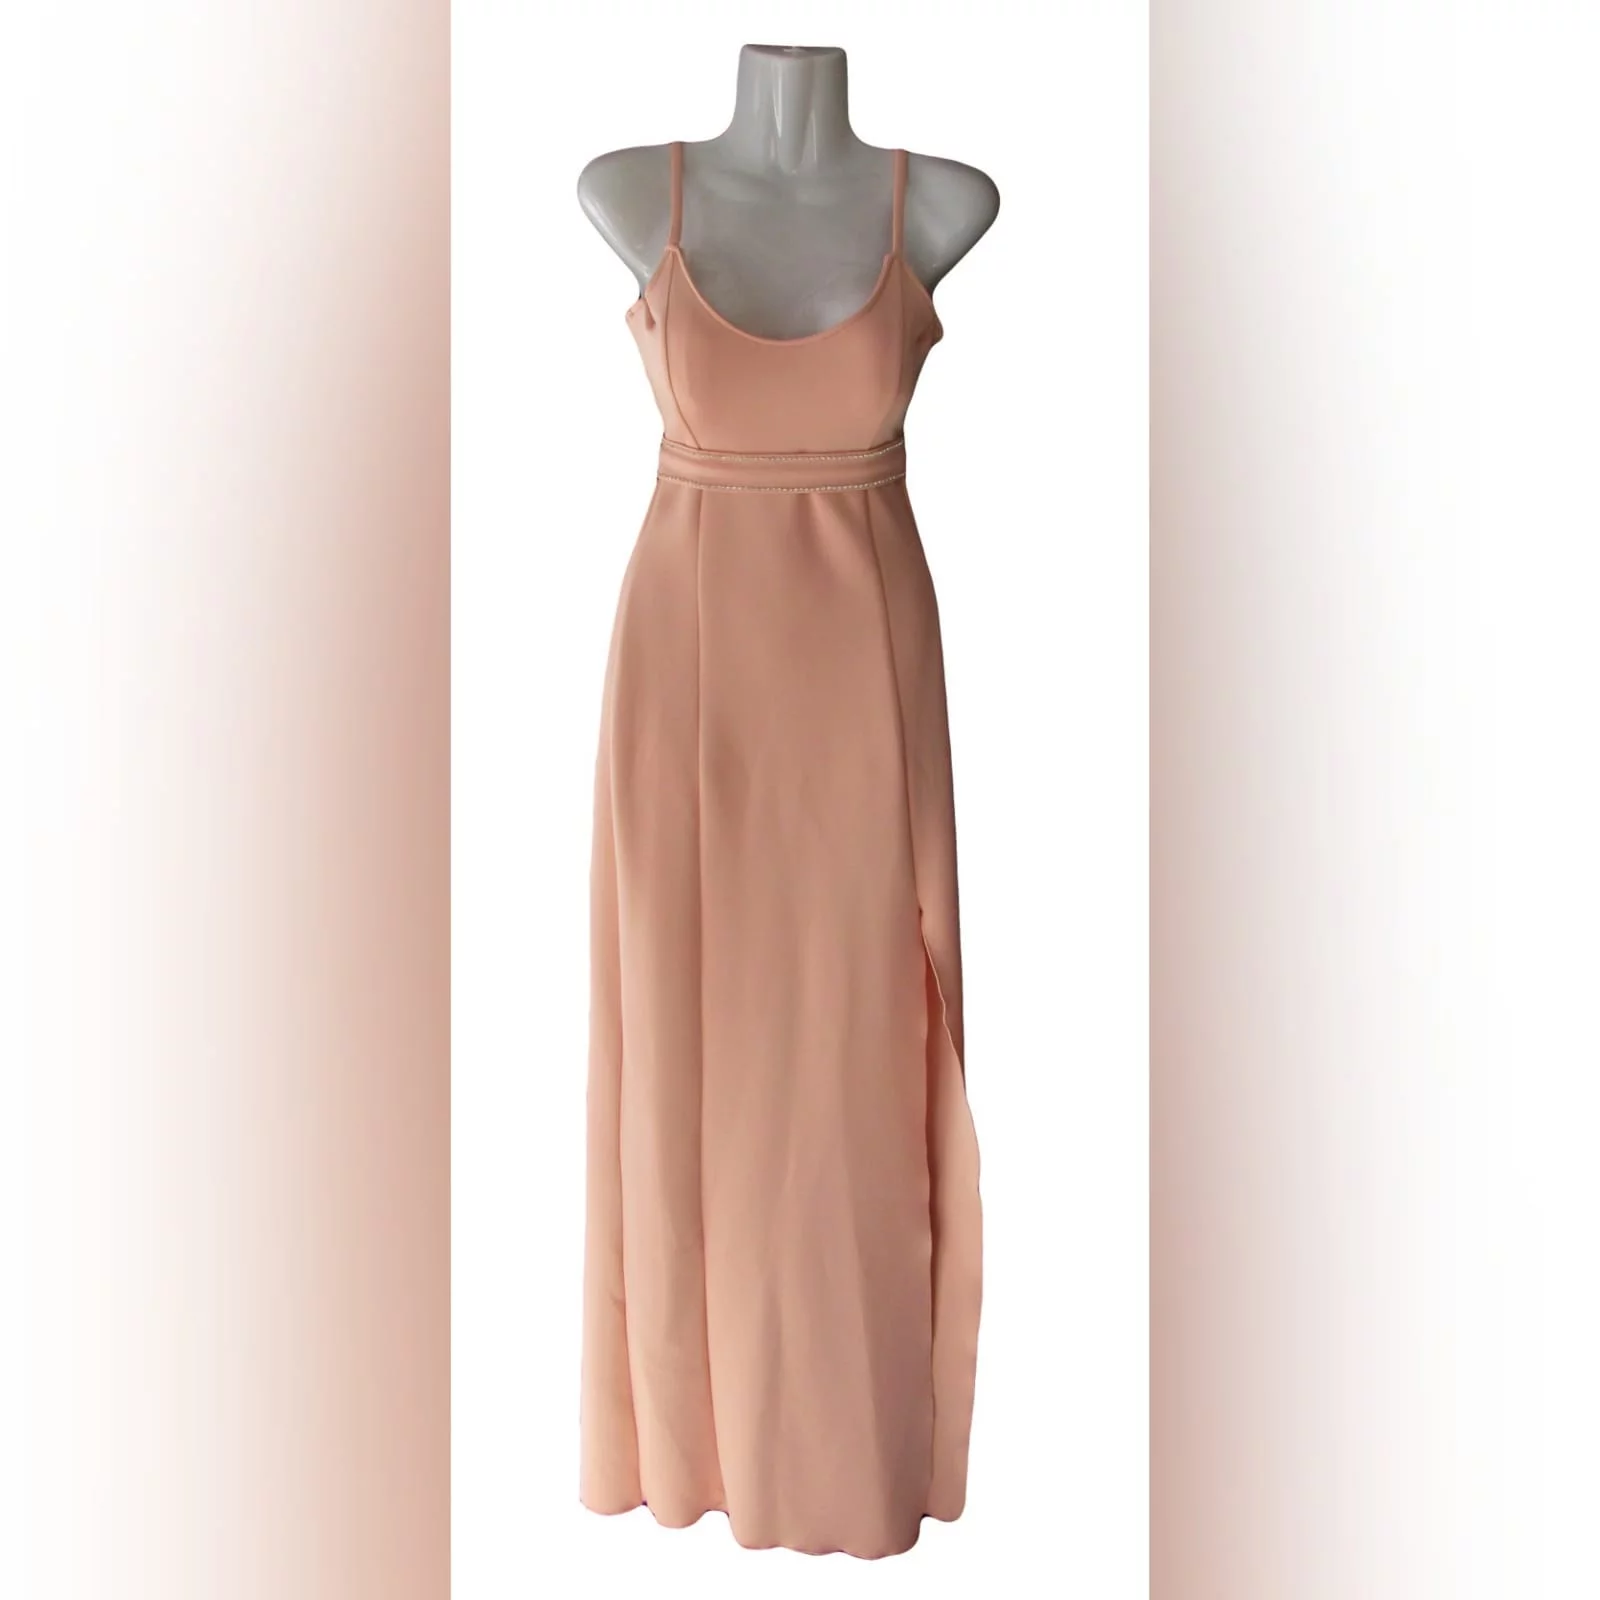 Long fitted peachy nude smart casual panel dress 3 long fitted peachy nude smart casual panel dress with a slit, shoulder straps and a removable waist belt detailed with diamante.